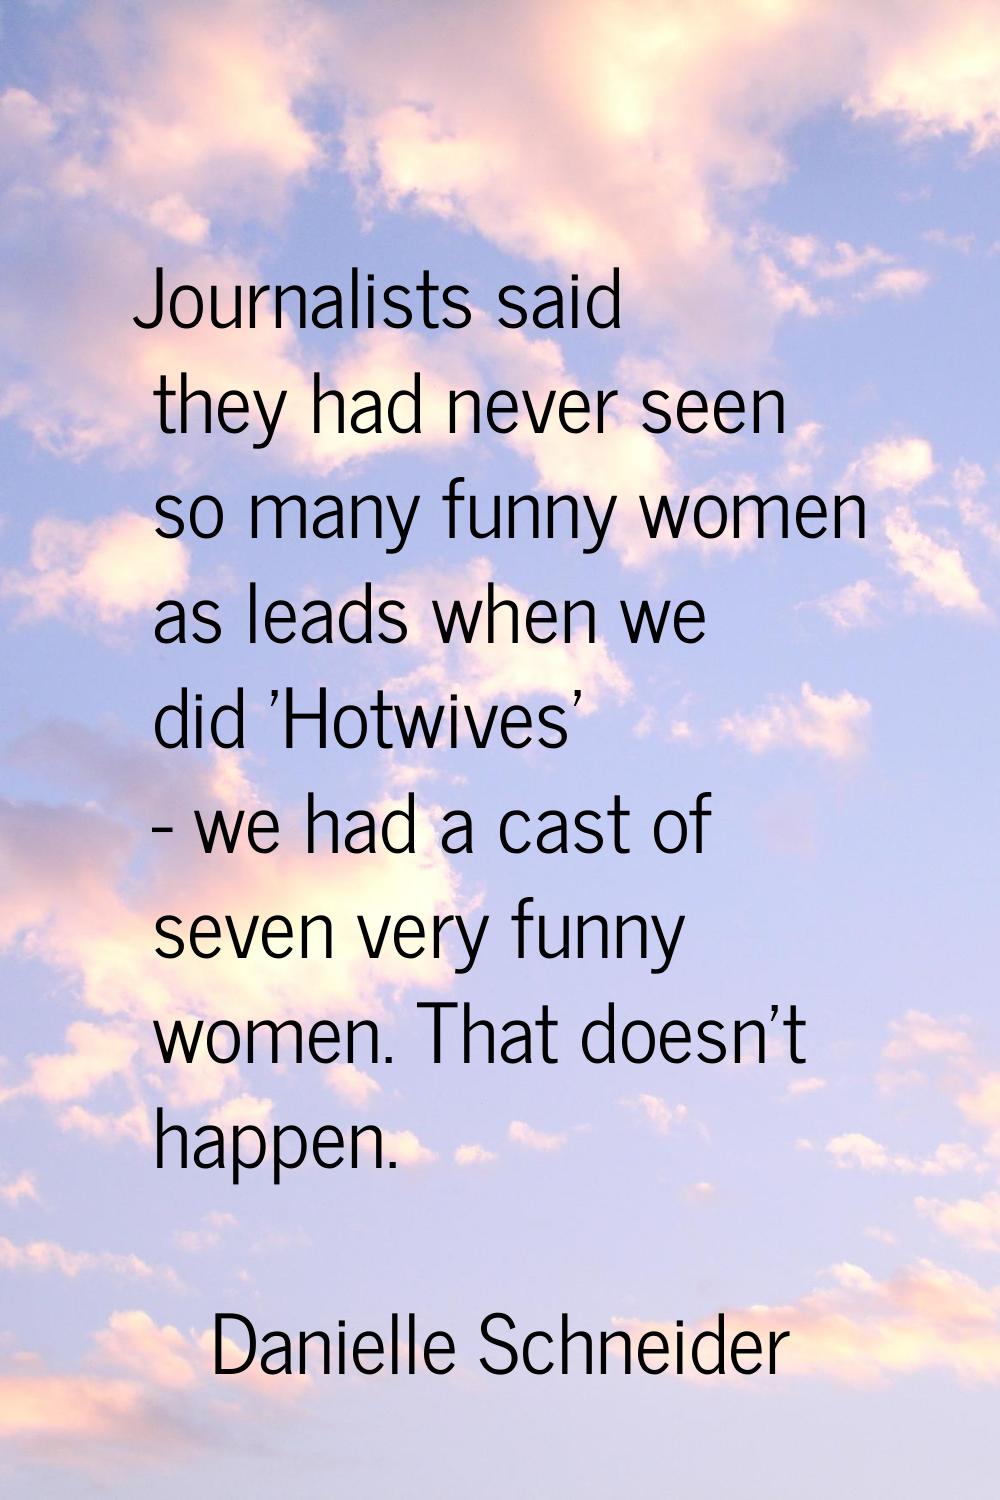 Journalists said they had never seen so many funny women as leads when we did 'Hotwives' - we had a